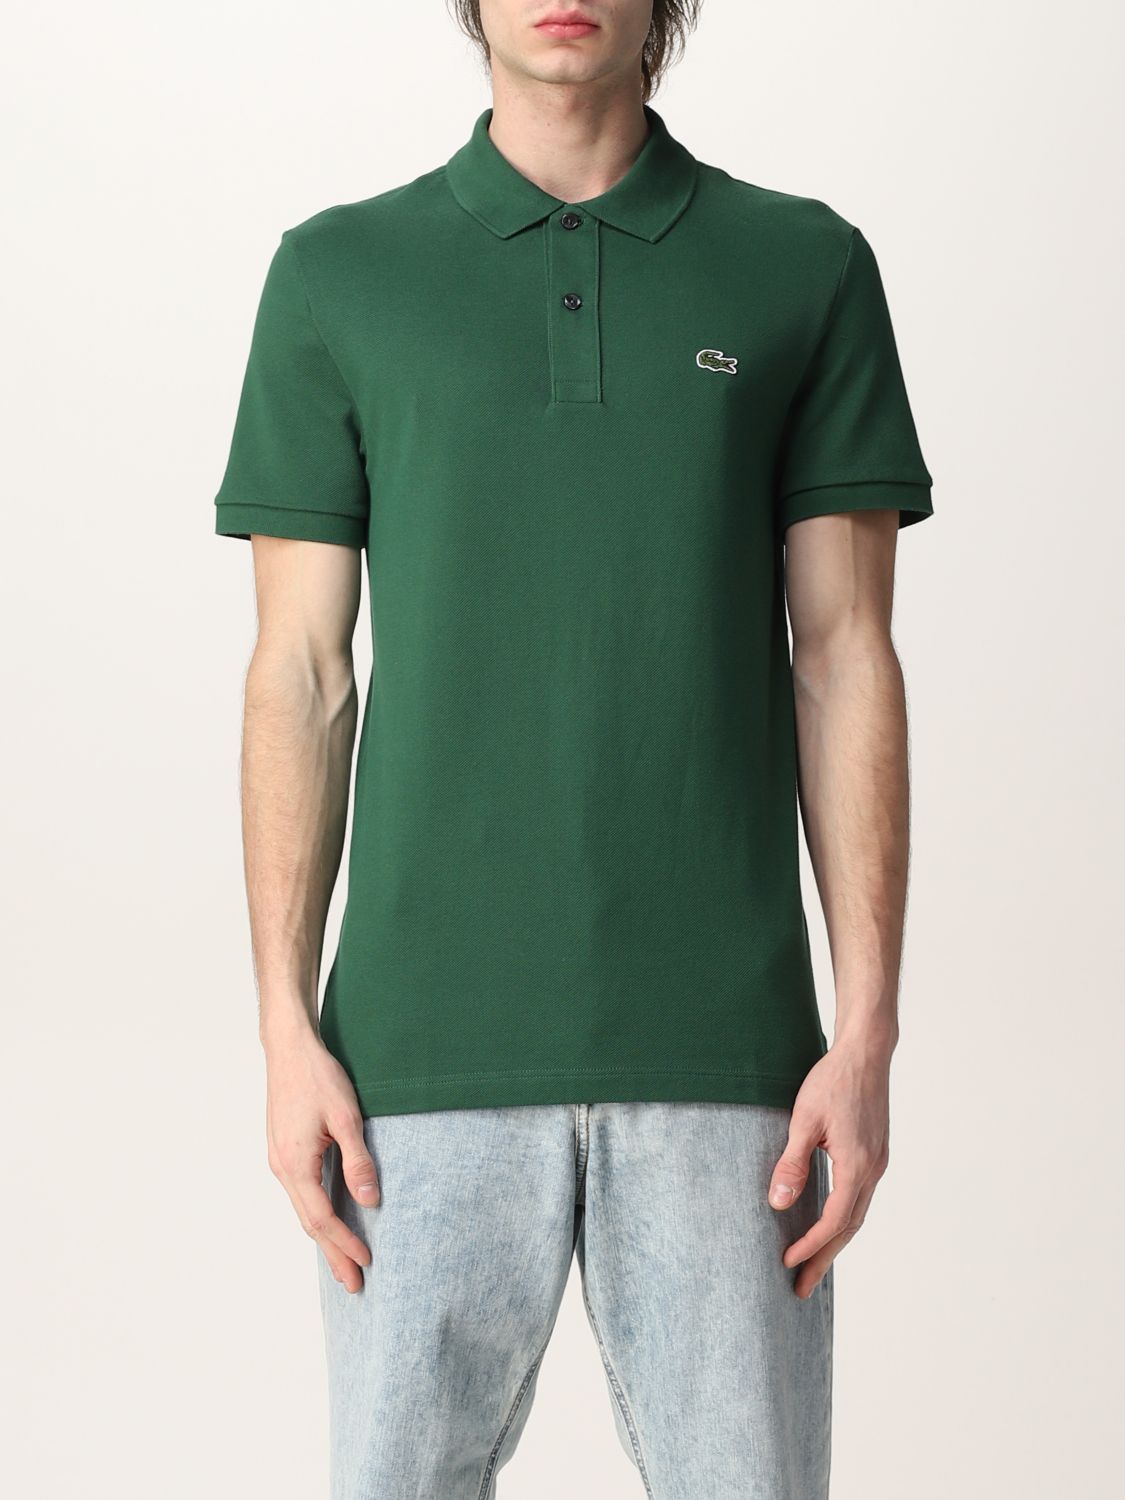 Opiate aflevere debitor Lacoste Outlet: basic polo shirt with logo - Green | Lacoste polo shirt  PH4012 online on GIGLIO.COM